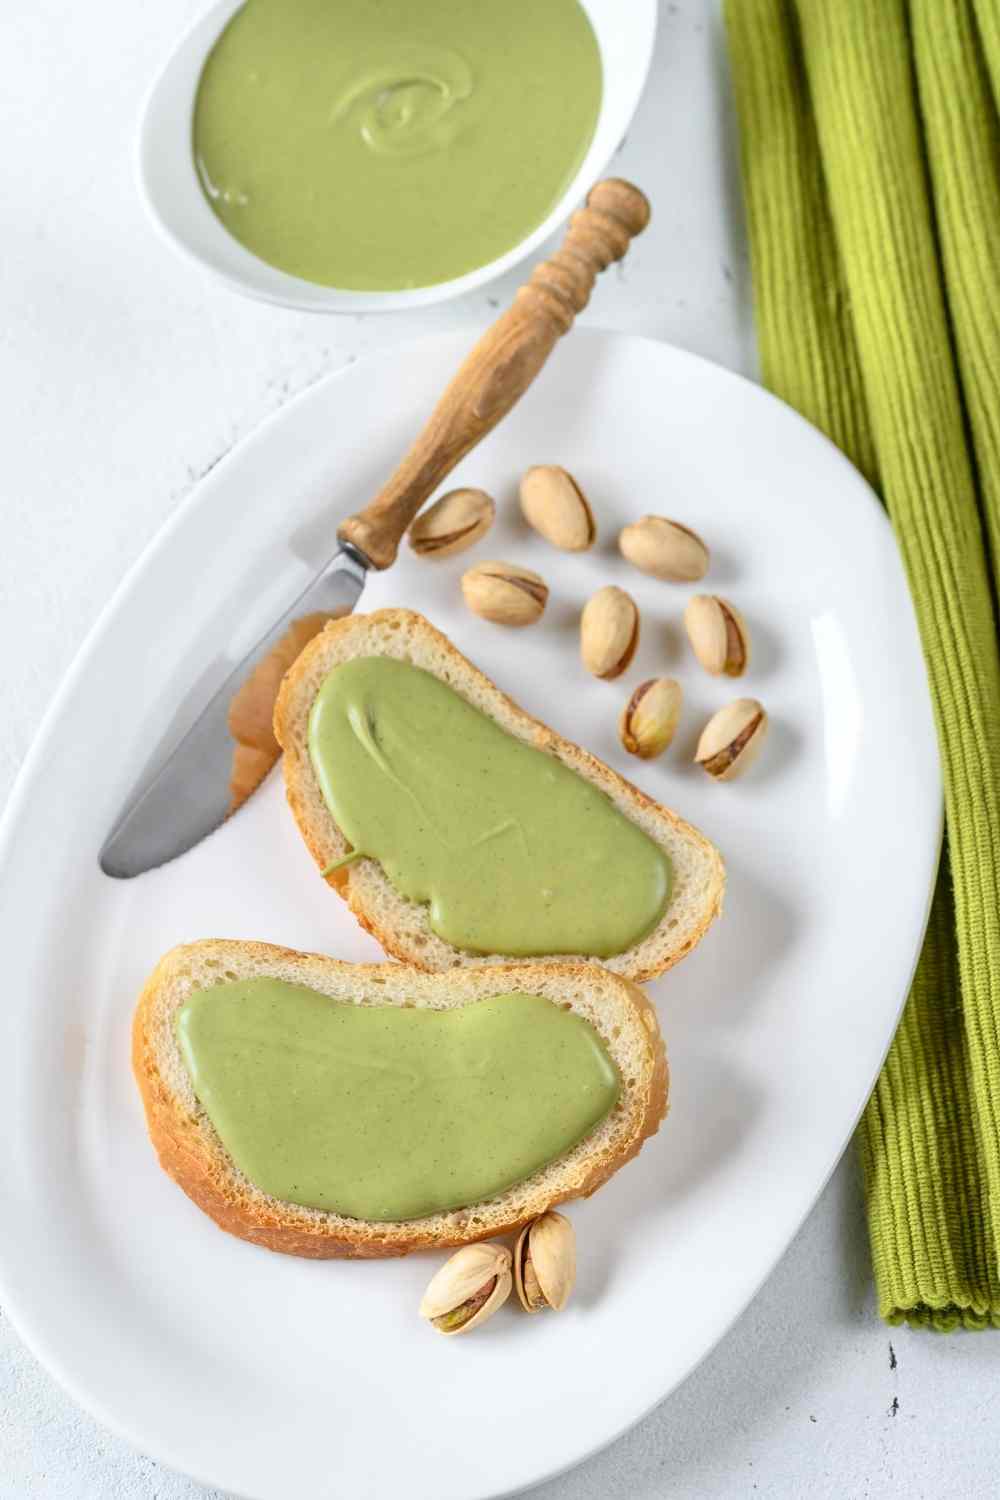 Pistachio butter - Health Benefits of Nut Butters